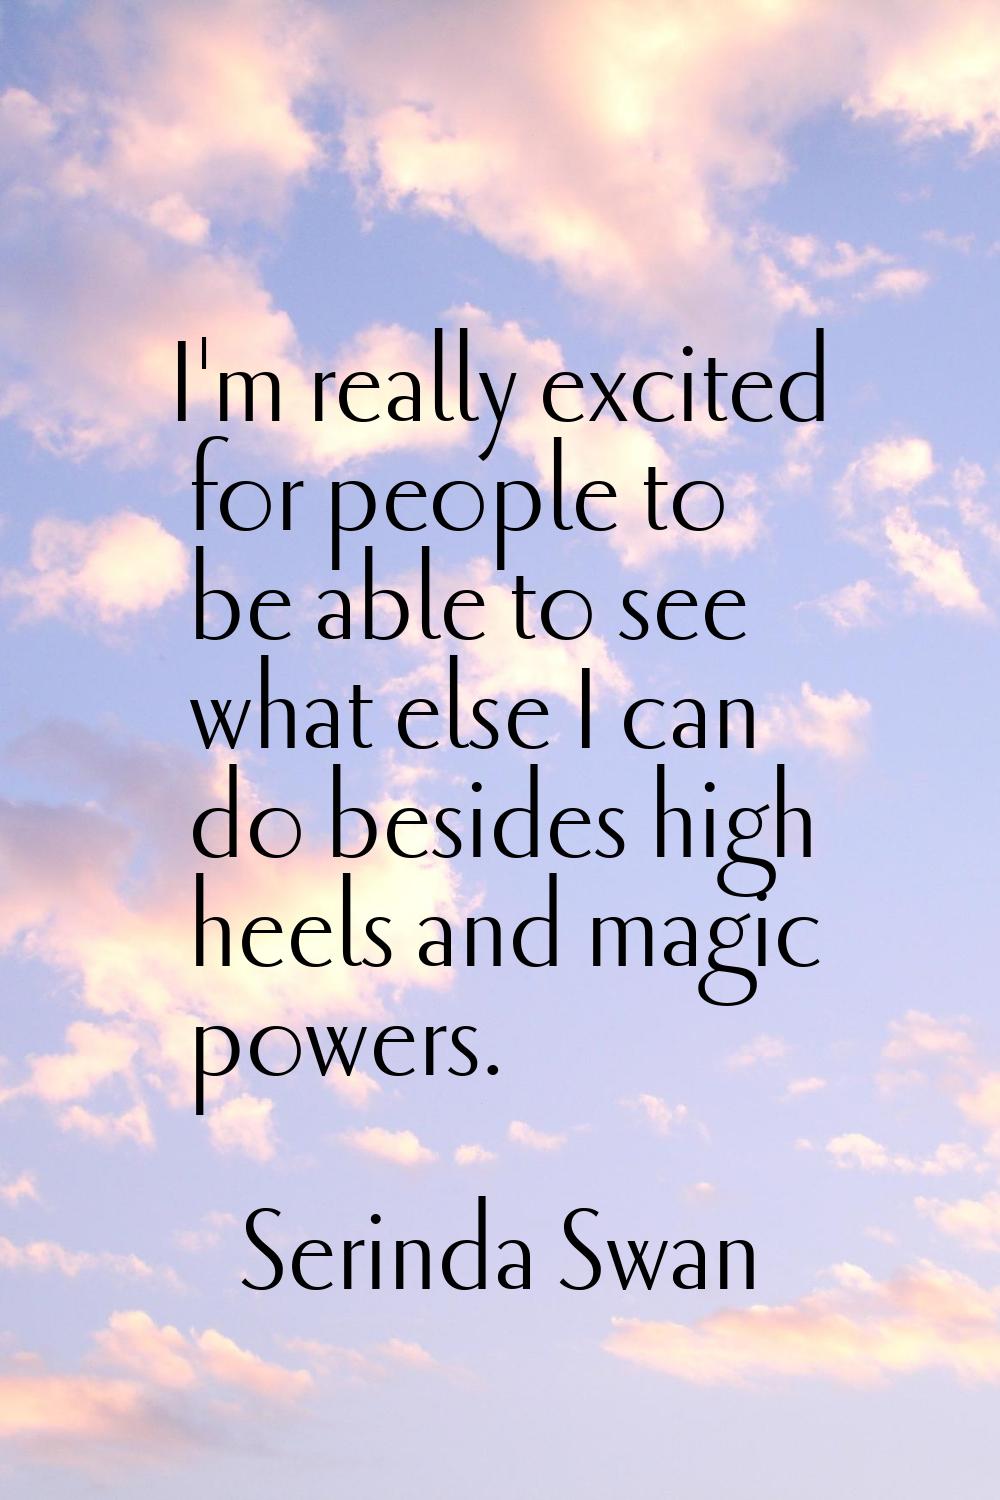 I'm really excited for people to be able to see what else I can do besides high heels and magic pow